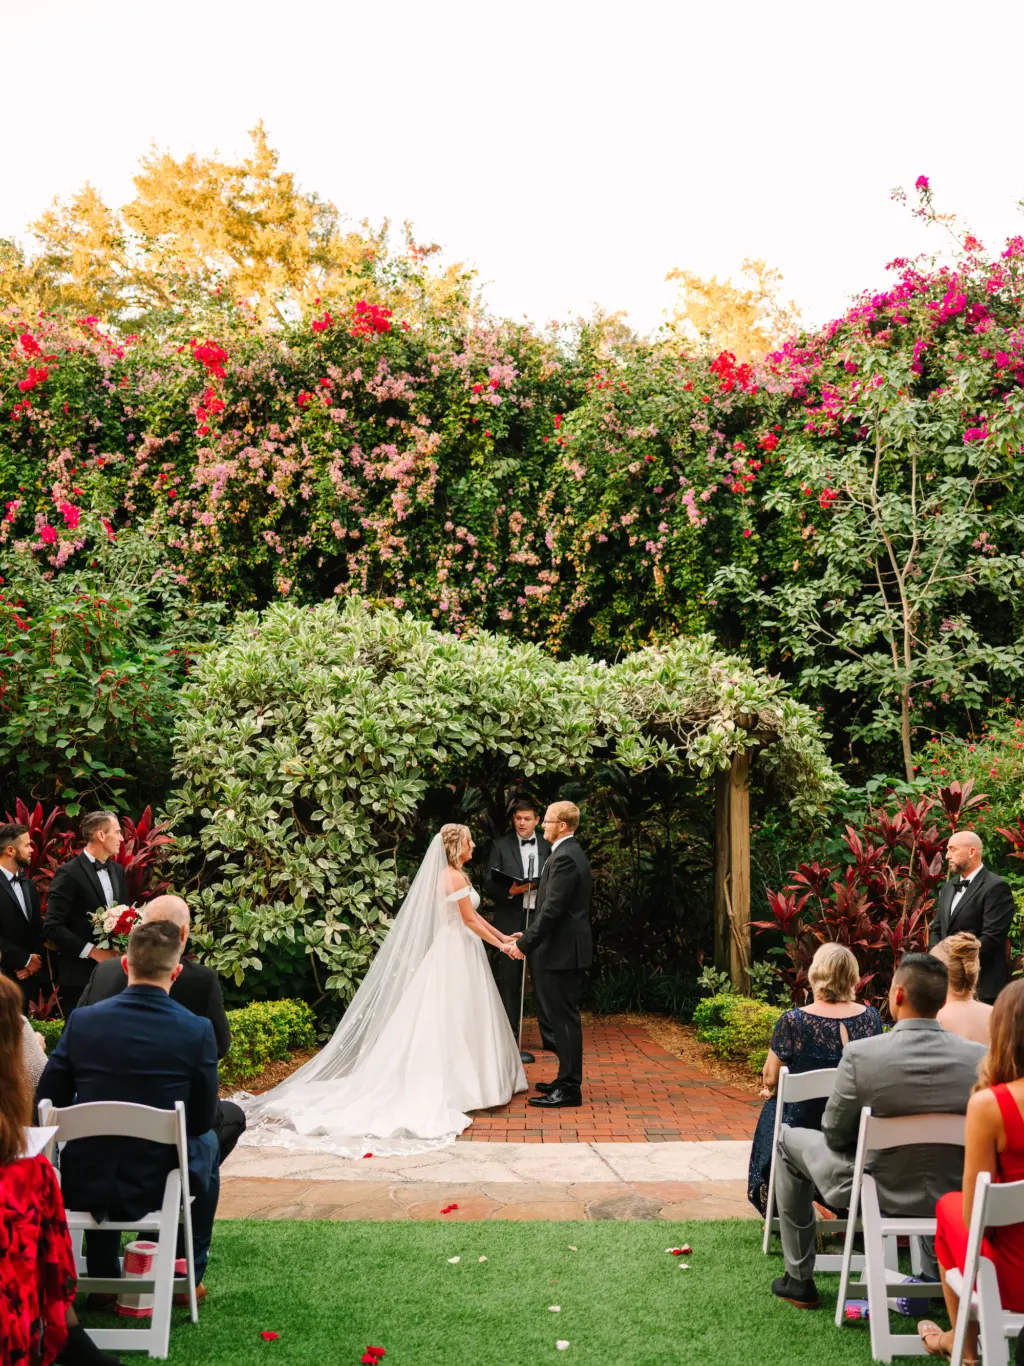 Bride and Groom Exchanging Vows in a Christmas Inspired Garden Wedding Ceremony | Downtown St. Petersburg Florida Event Venue Sunken Gardens